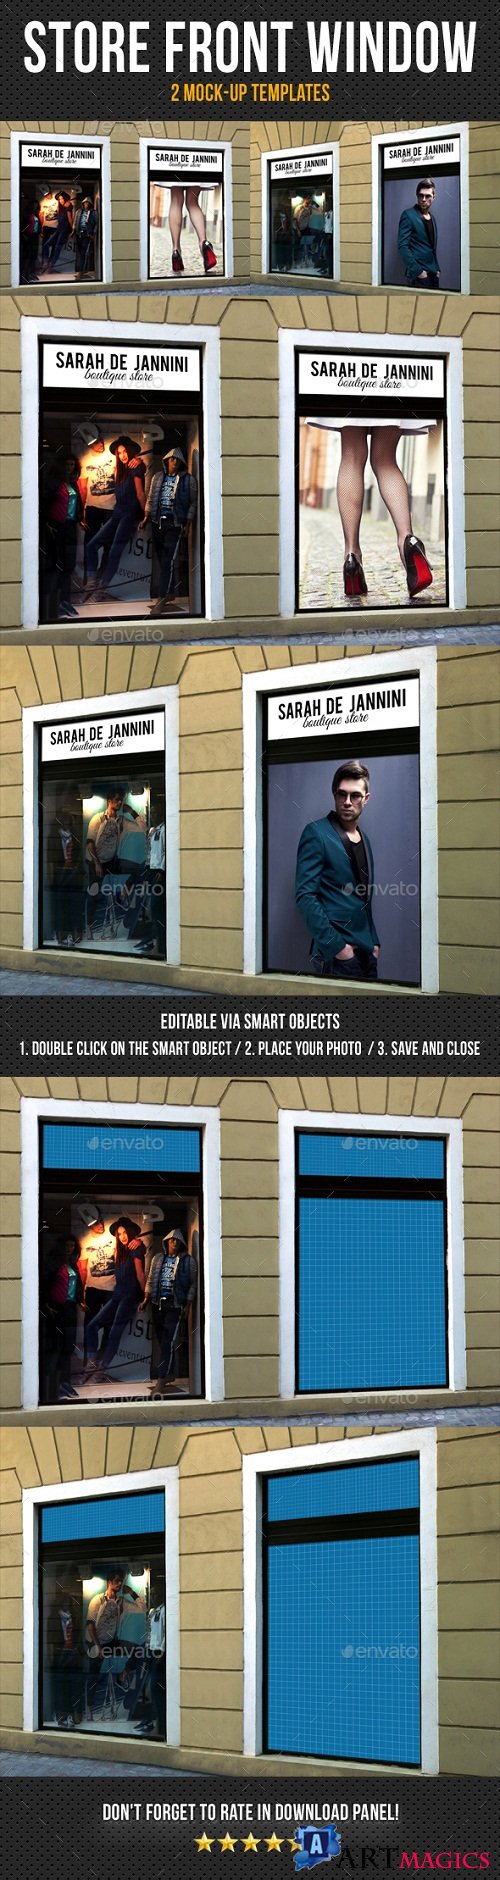 Store Front Window Mock-Up Pack 05 - 19591397